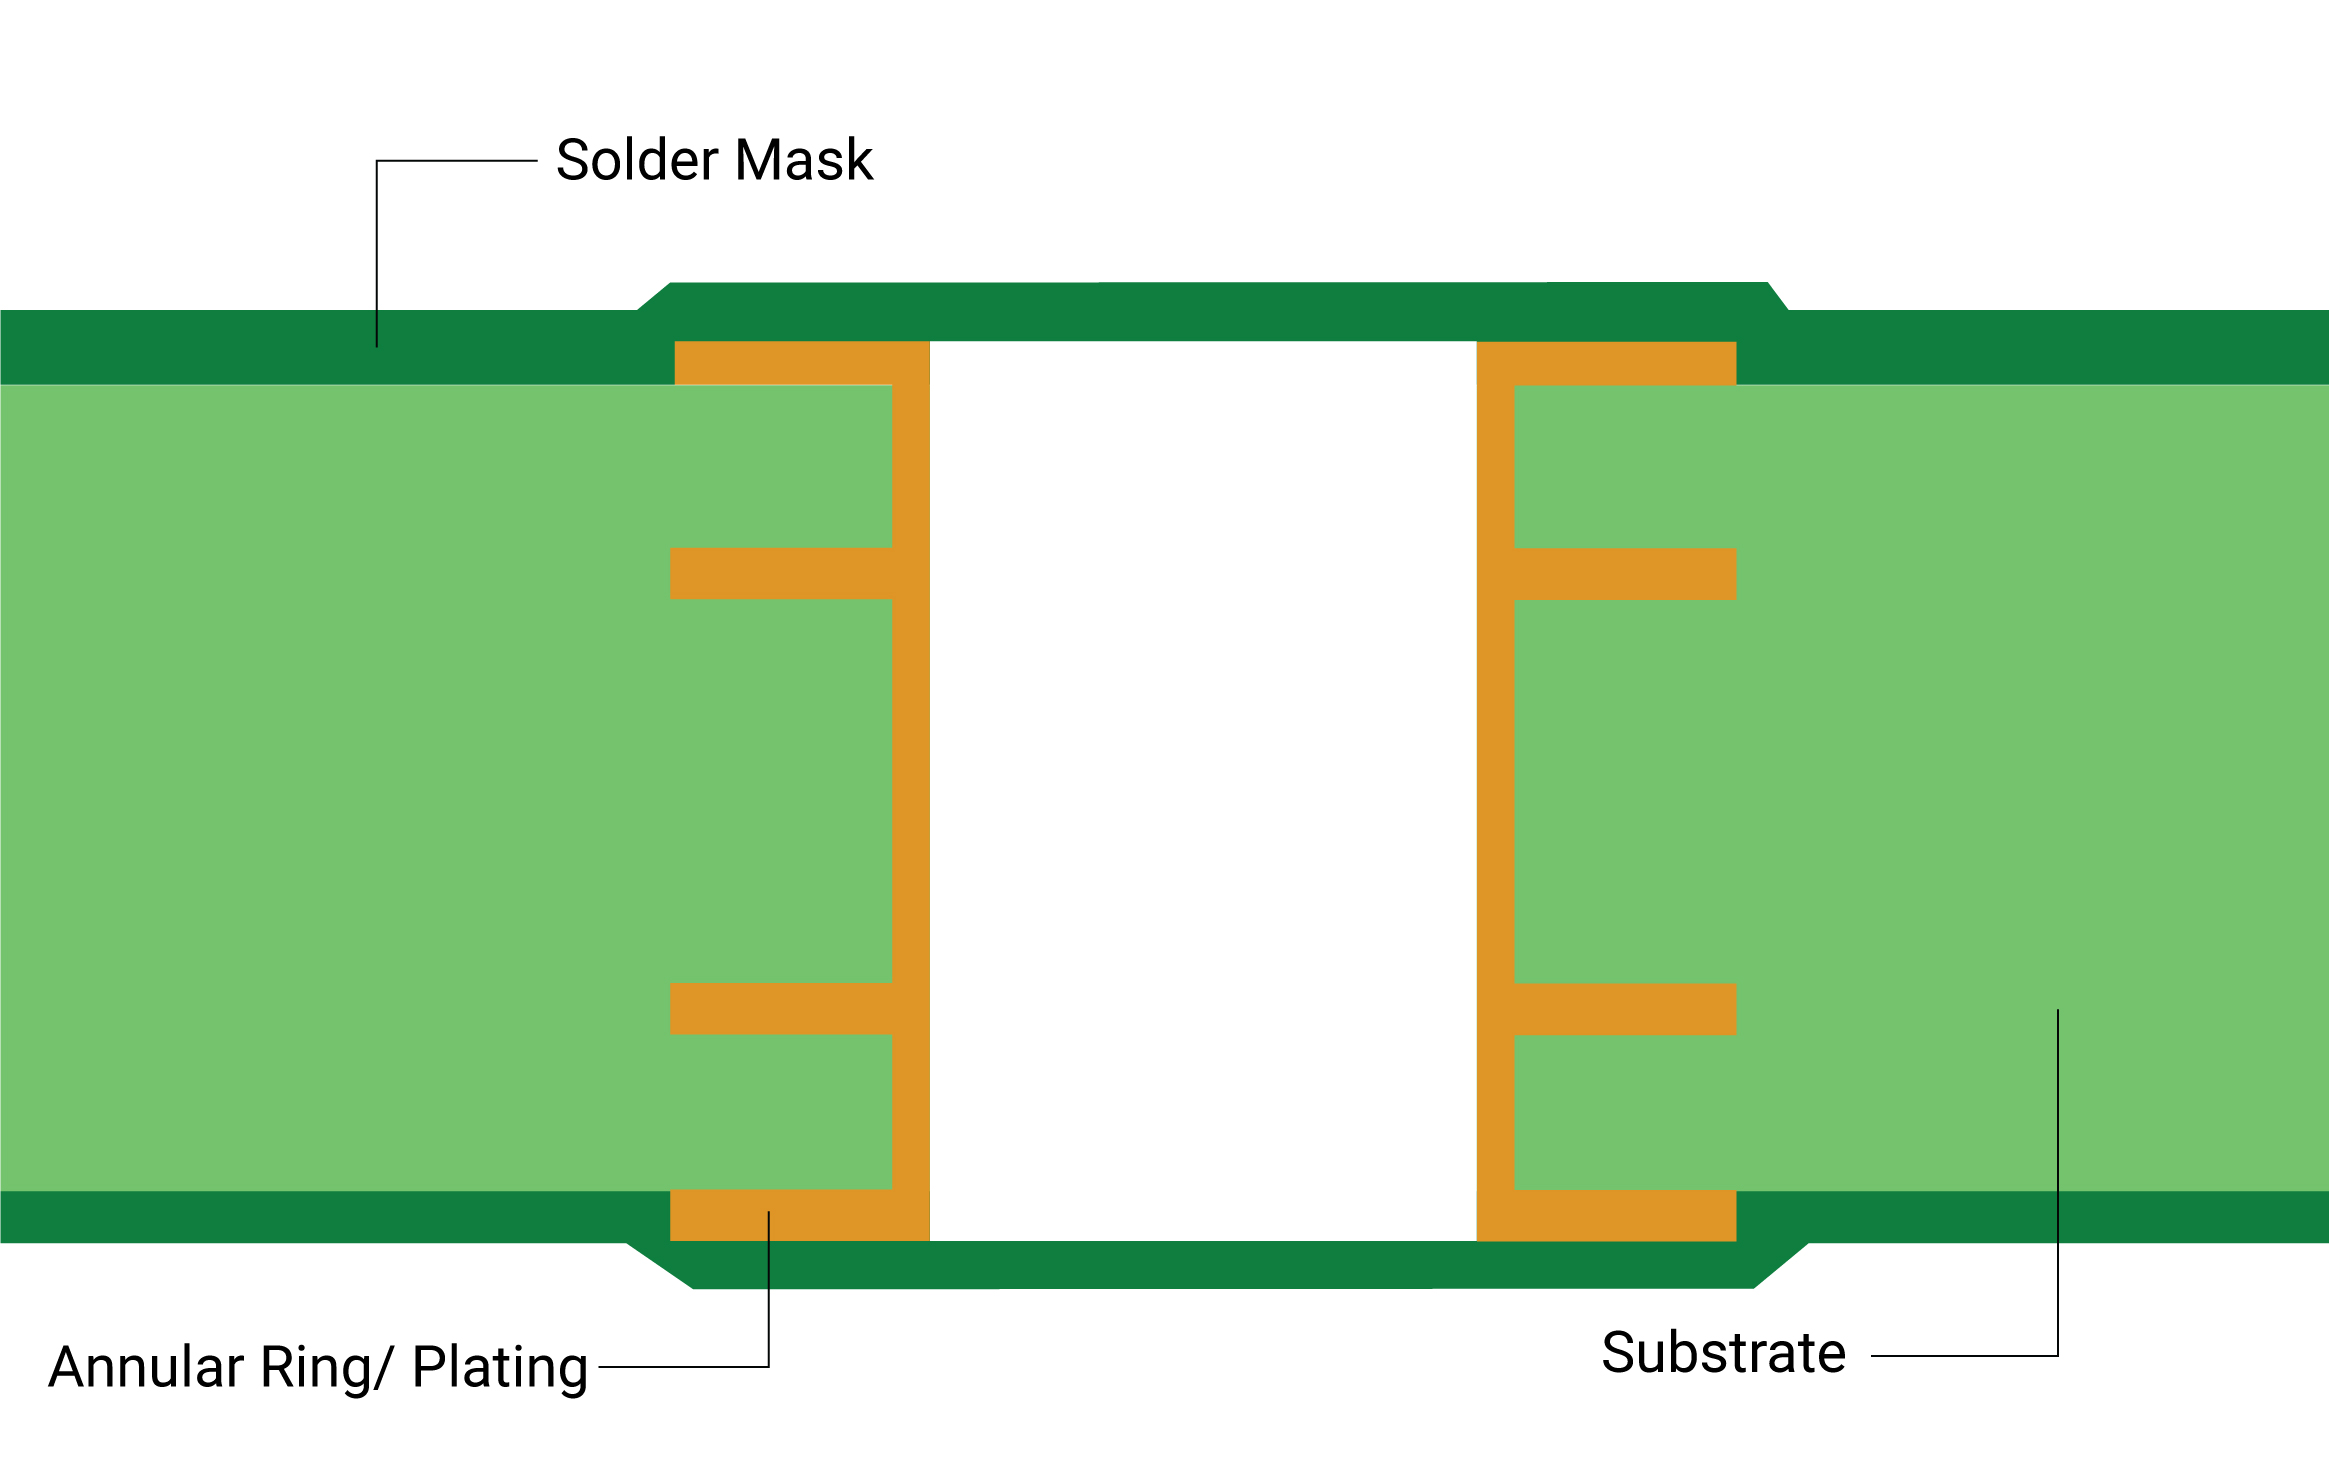 Via Covering means that the via is covered by a solder mask